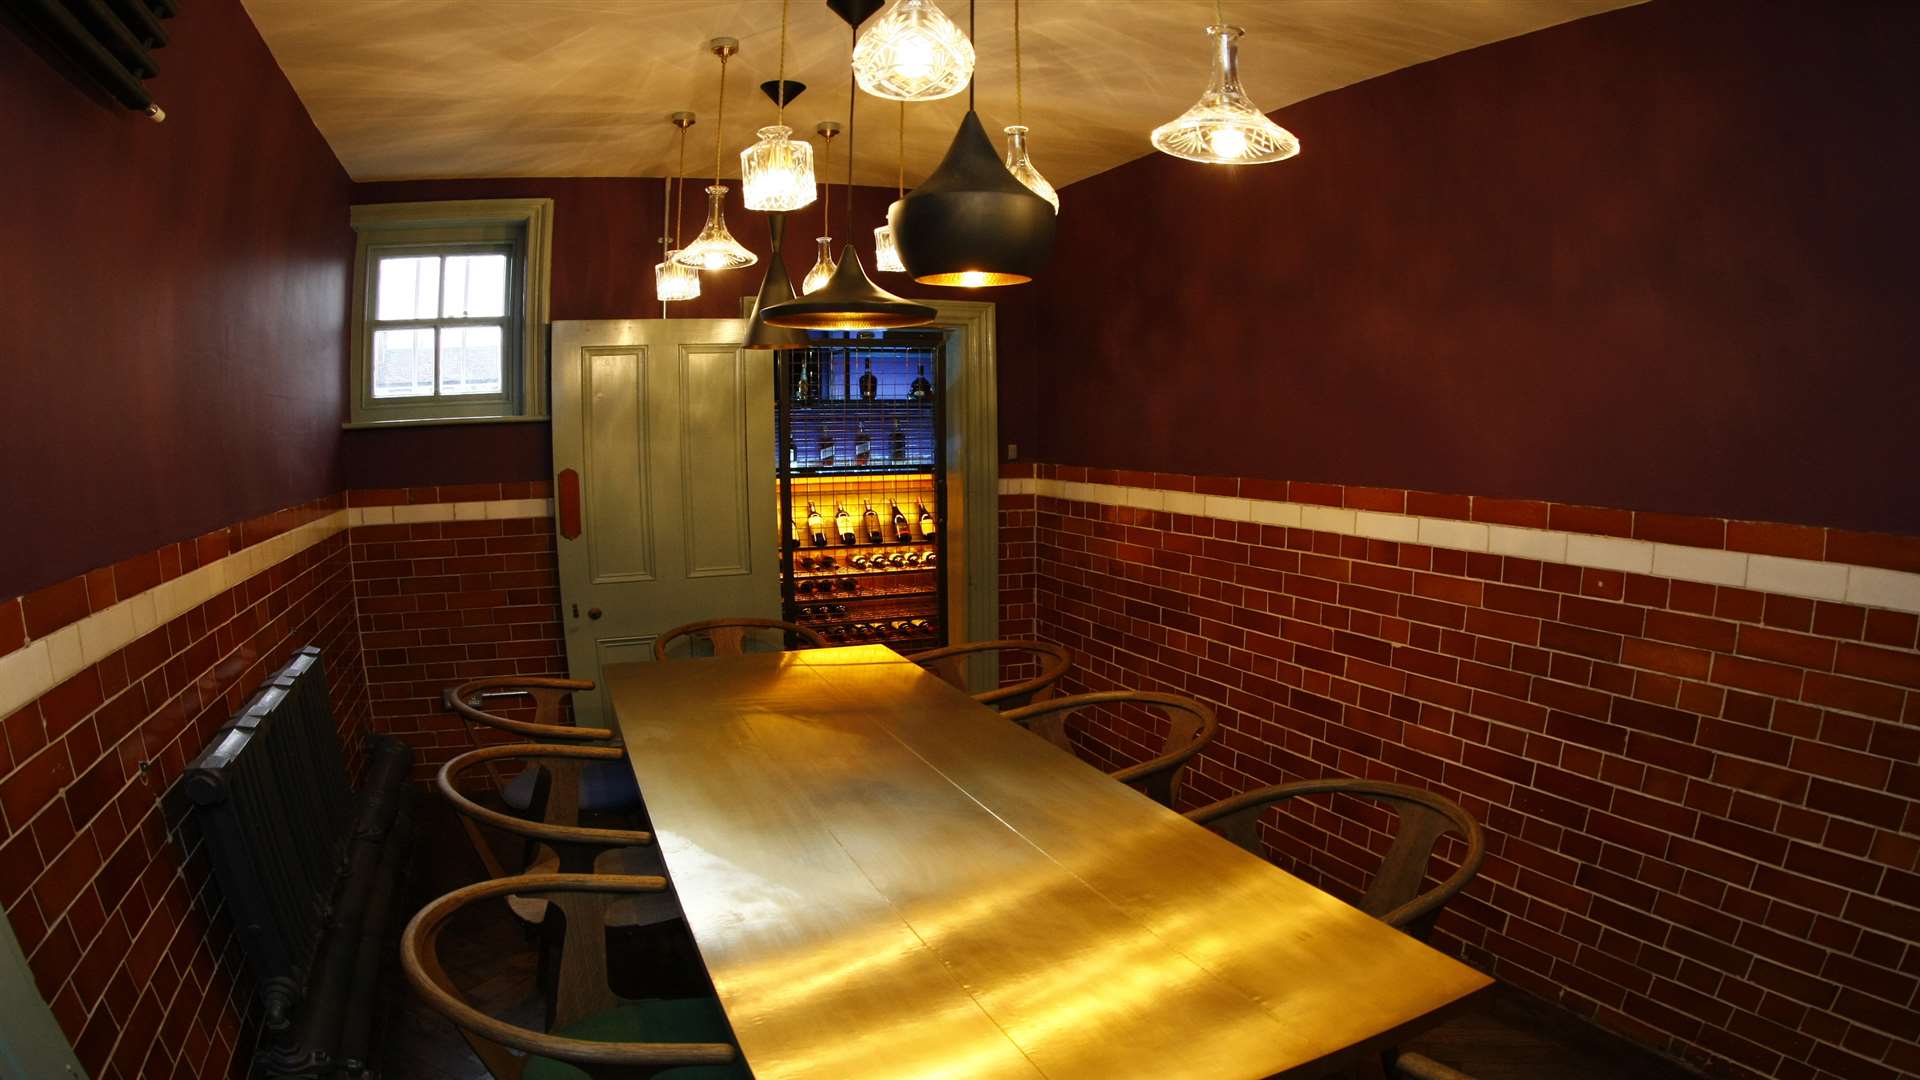 One of the private dining rooms with a wine cellar